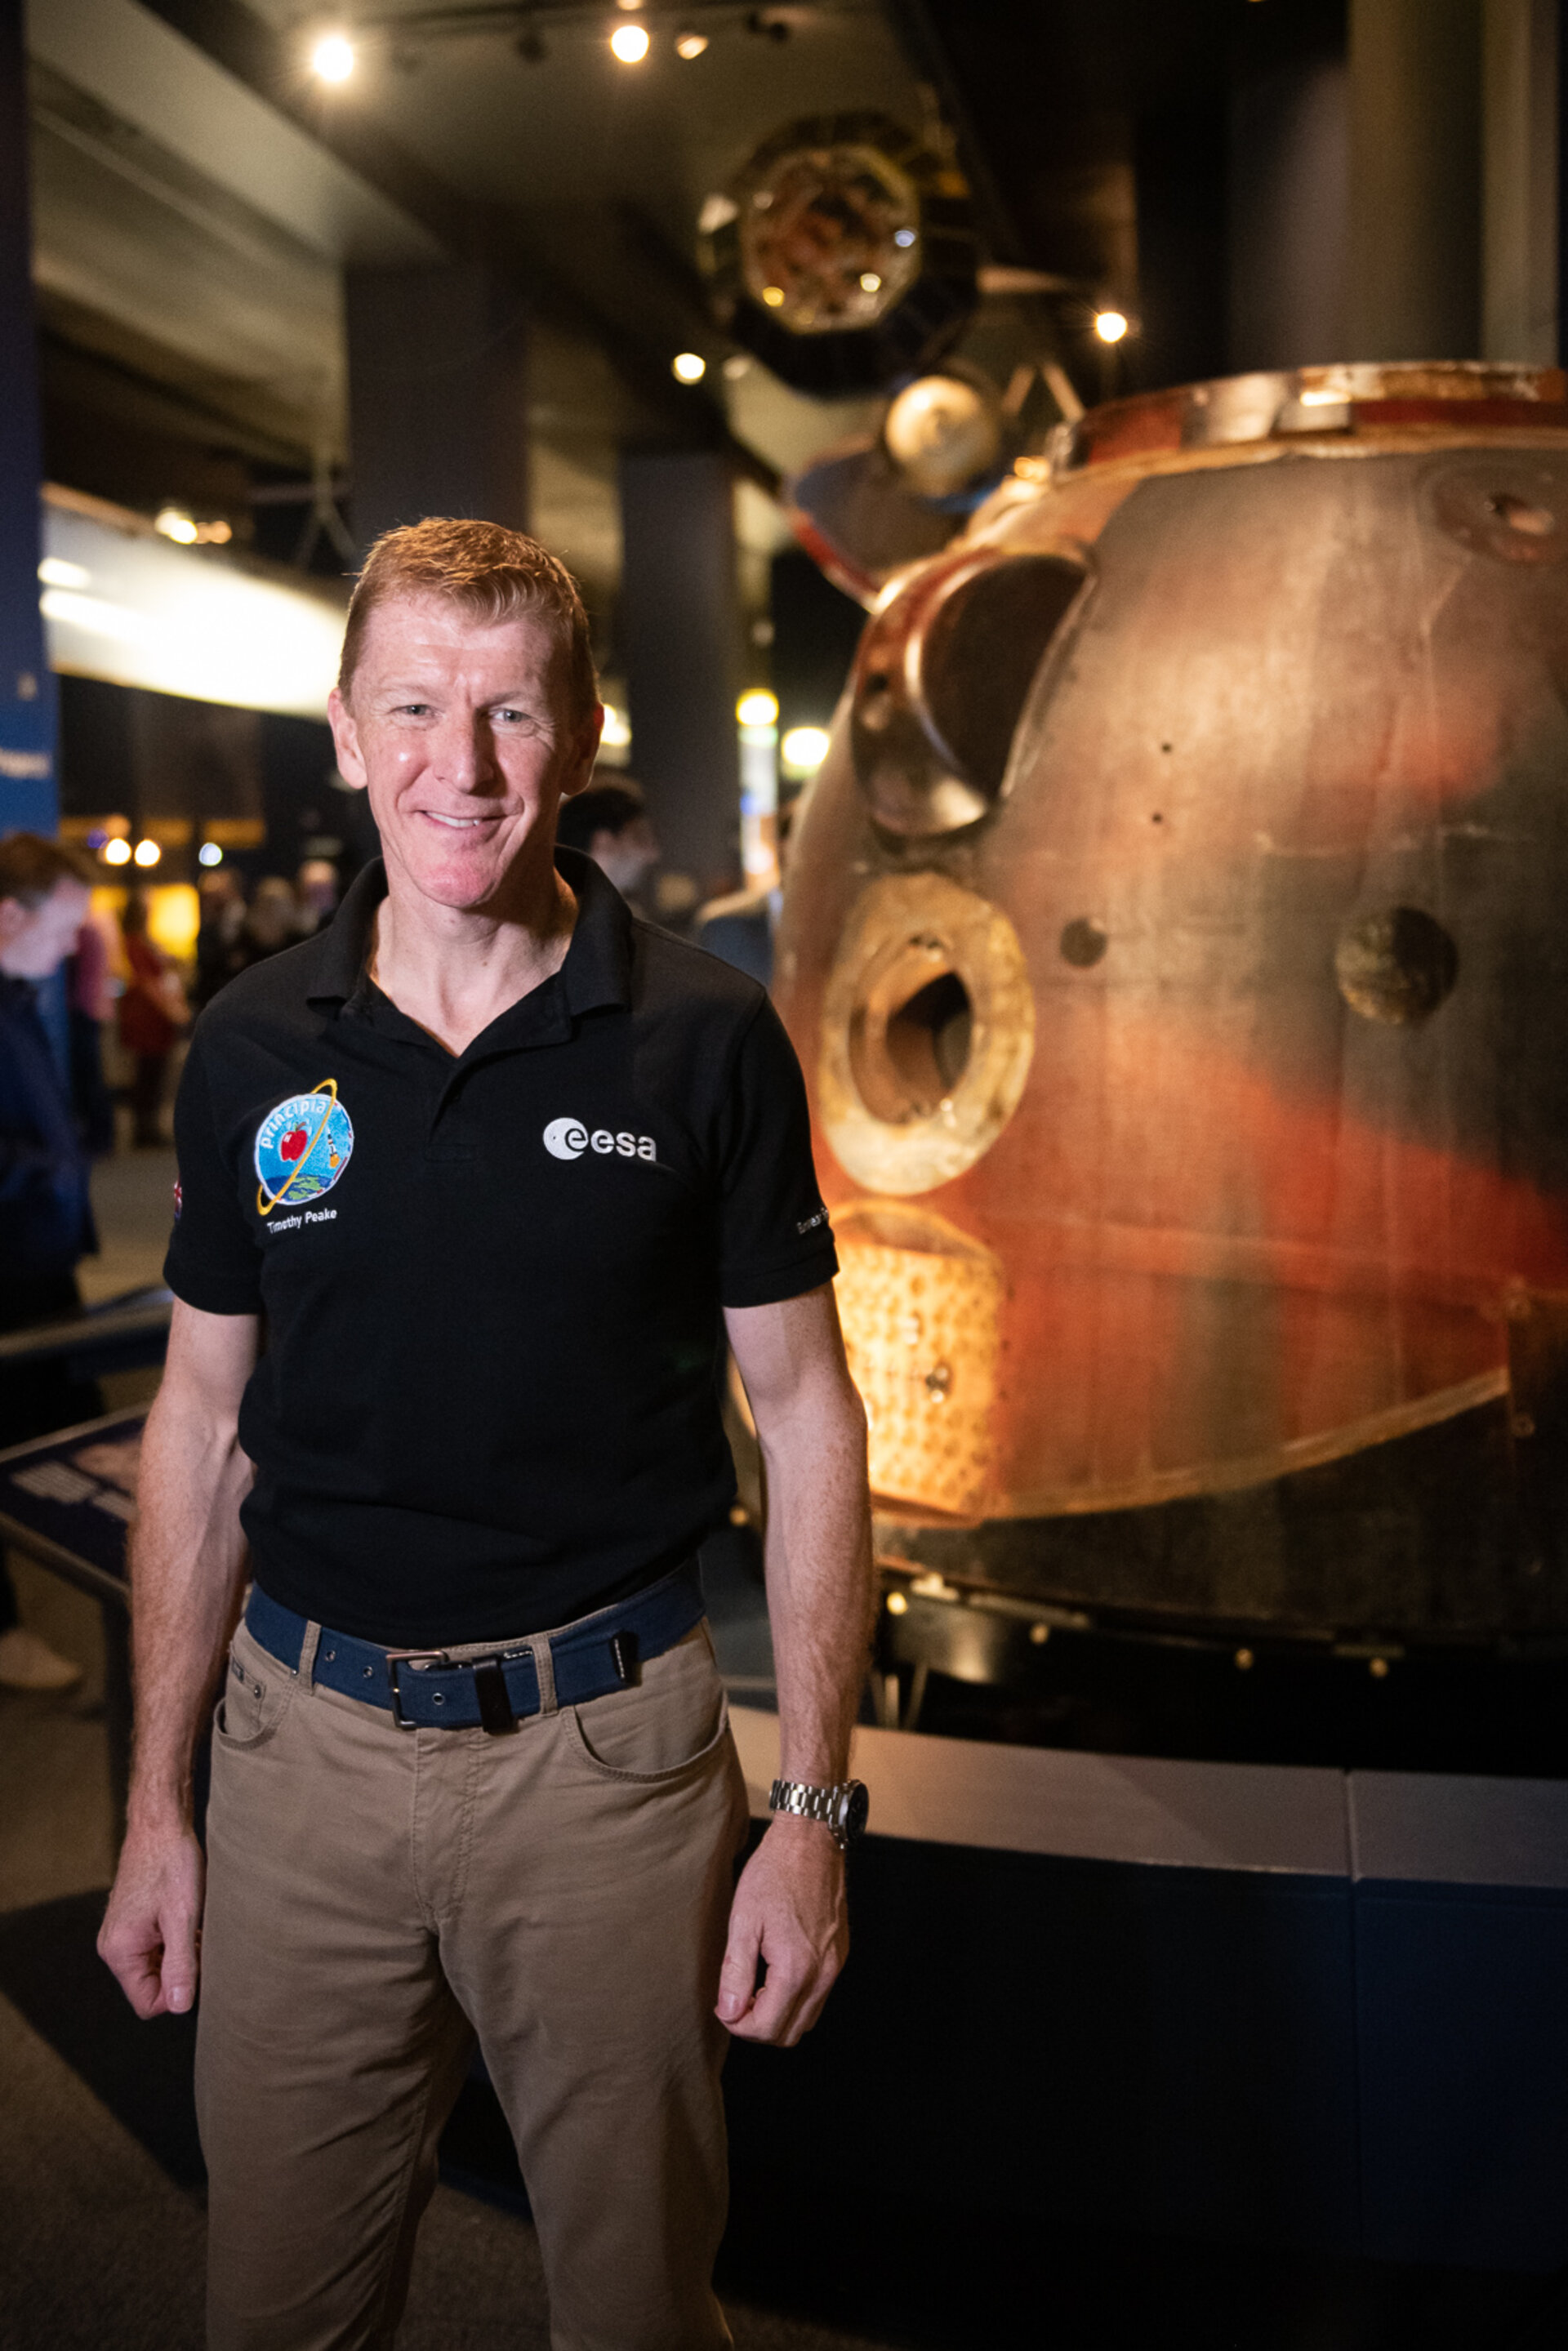 Tim Peake with the Soyuz descent module at the Science Museum in London